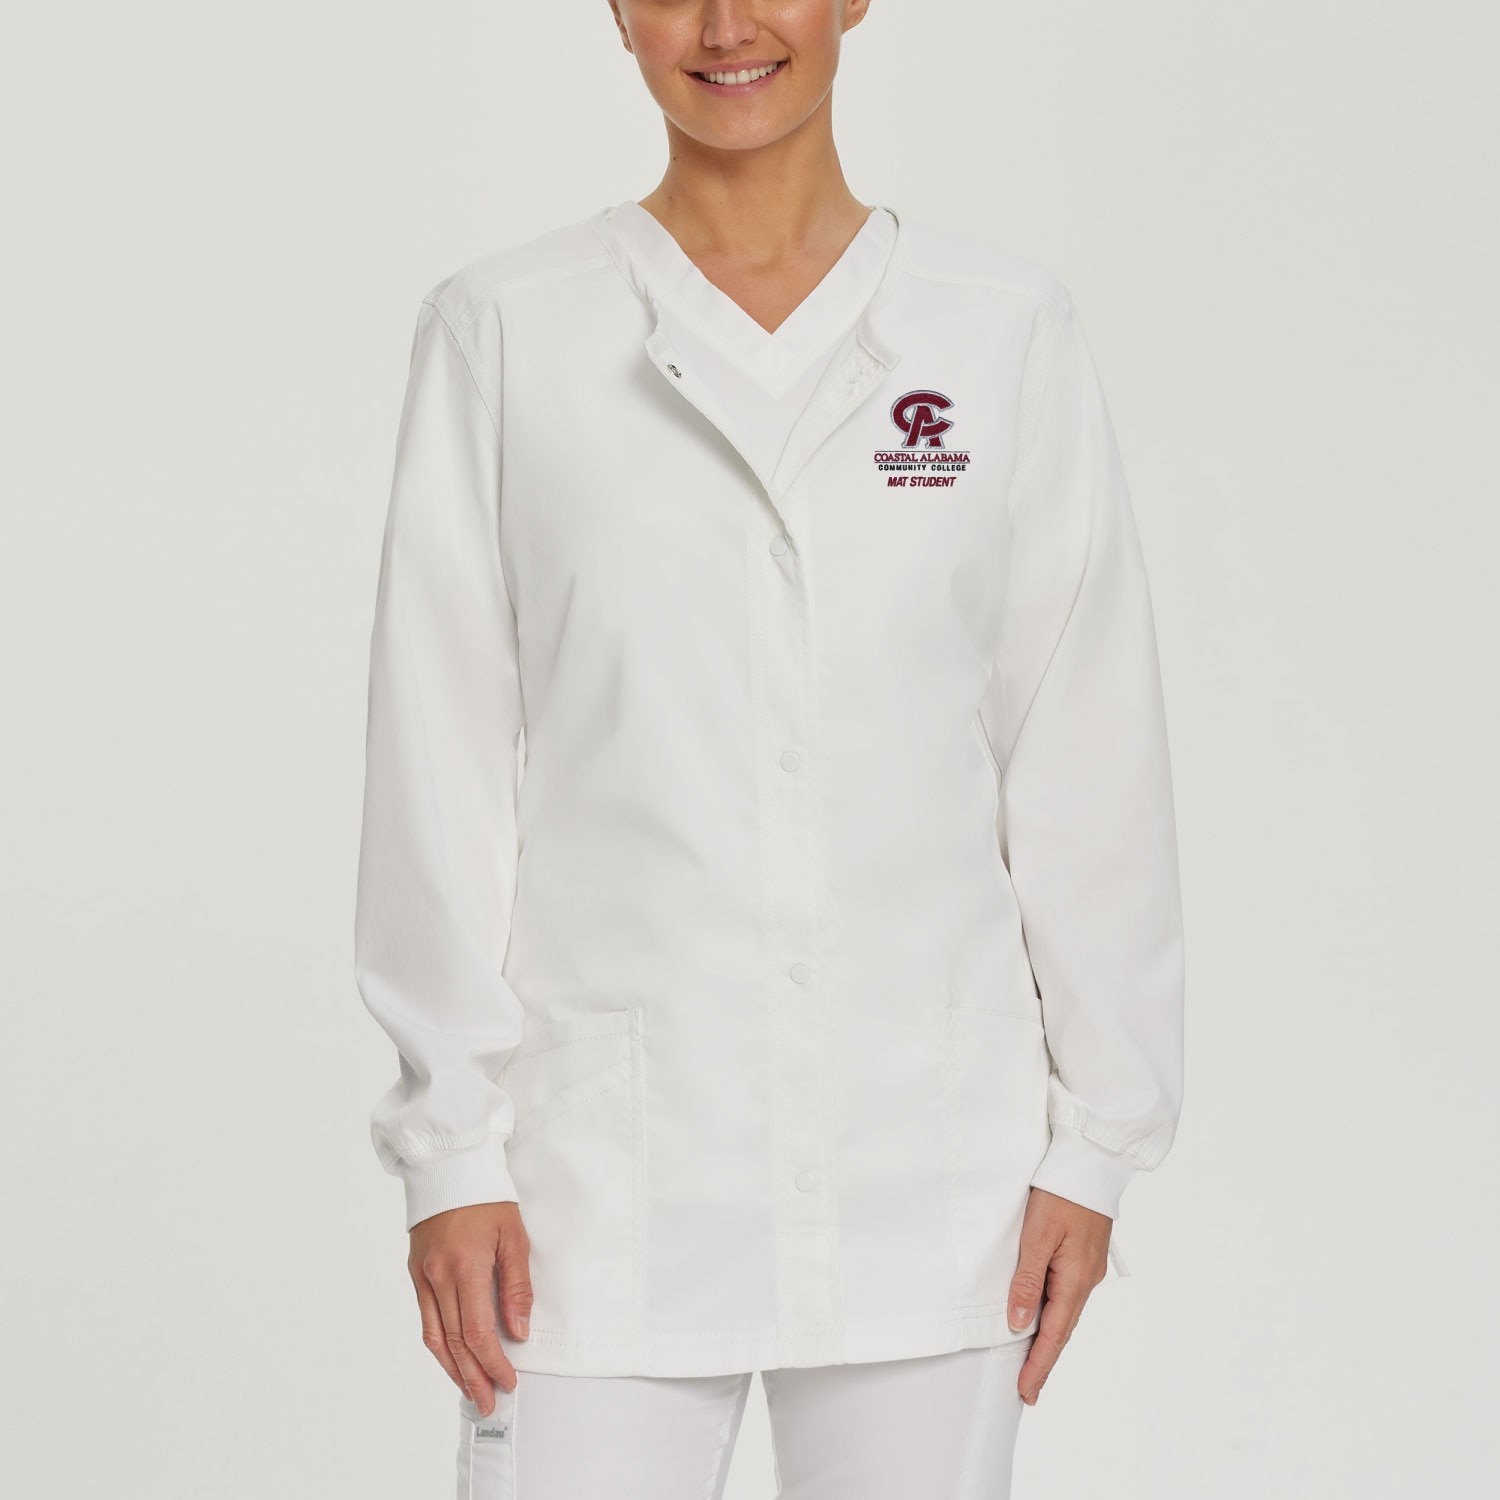 Women's Med Assistant White Warm-up Coat